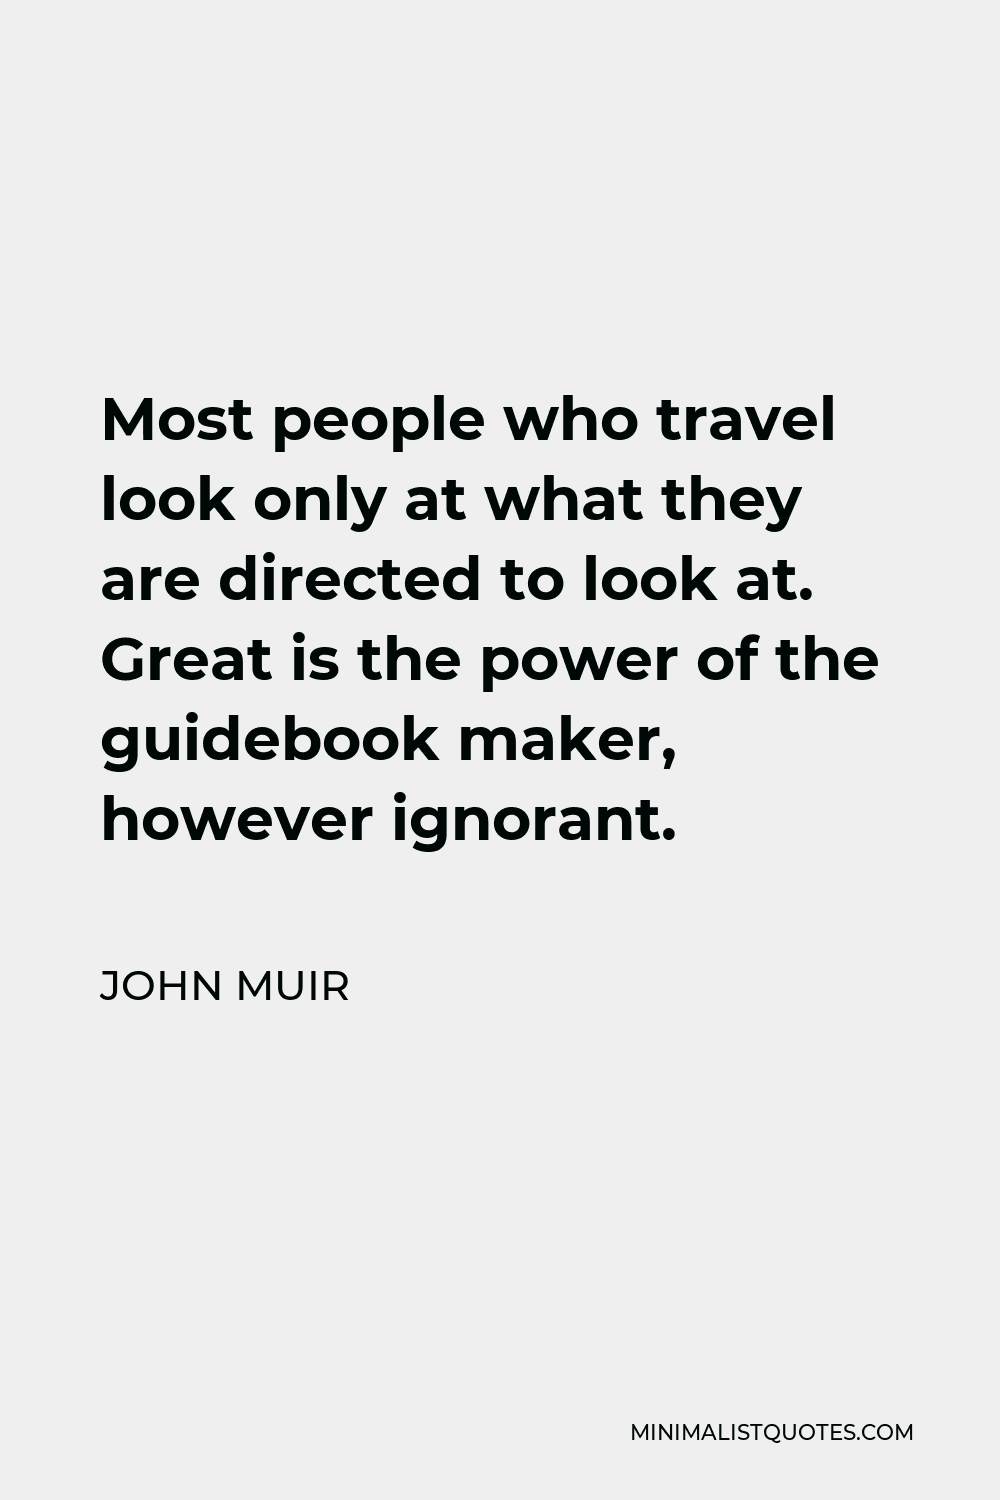 John Muir Quote - Most people who travel look only at what they are directed to look at. Great is the power of the guidebook maker, however ignorant.